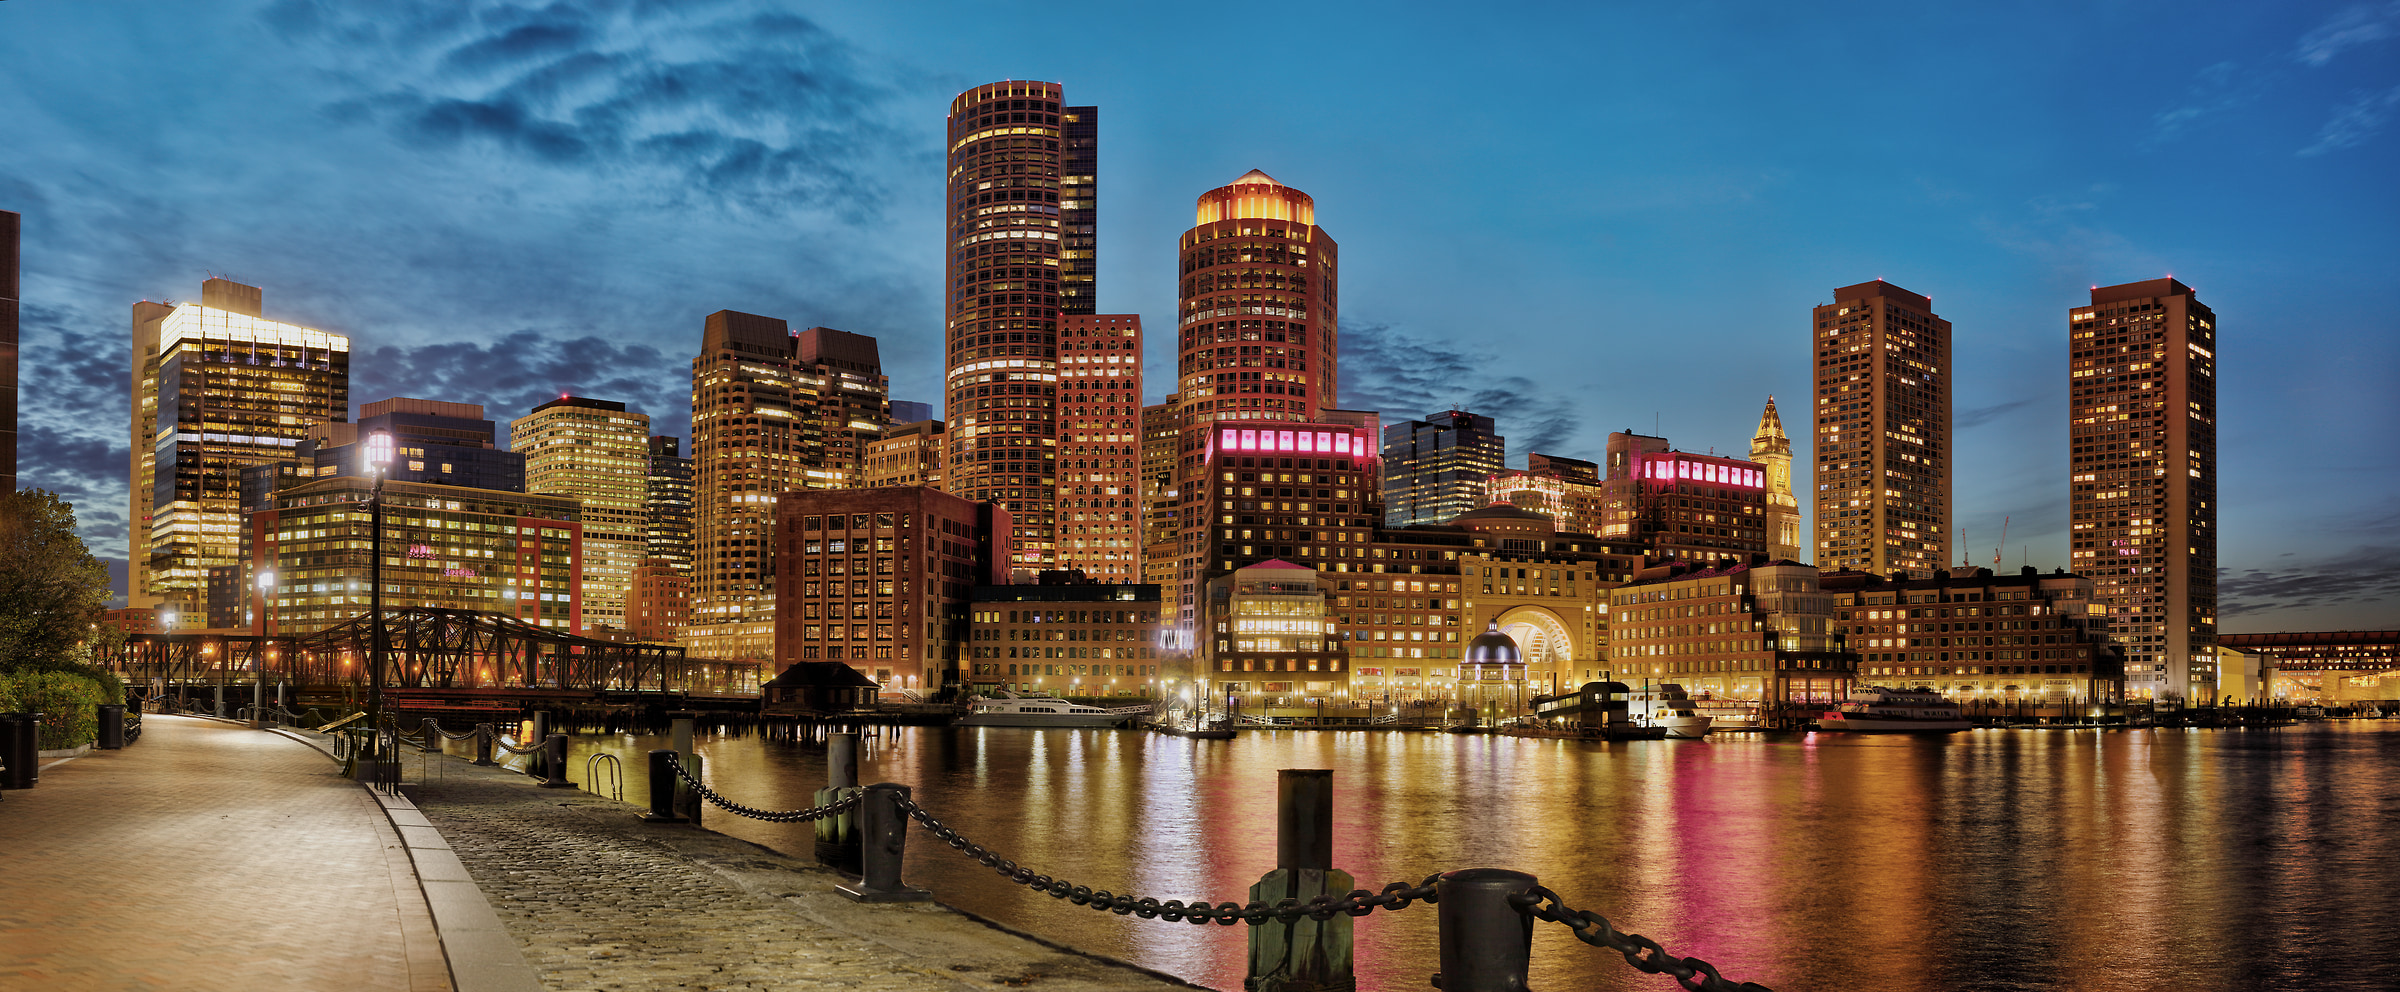 630 megapixels! A very high resolution, large-format VAST photo print of the Boston skyline at night; photograph created by Phil Crawshay in Fan Pier Park, Boston, Massachusetts.